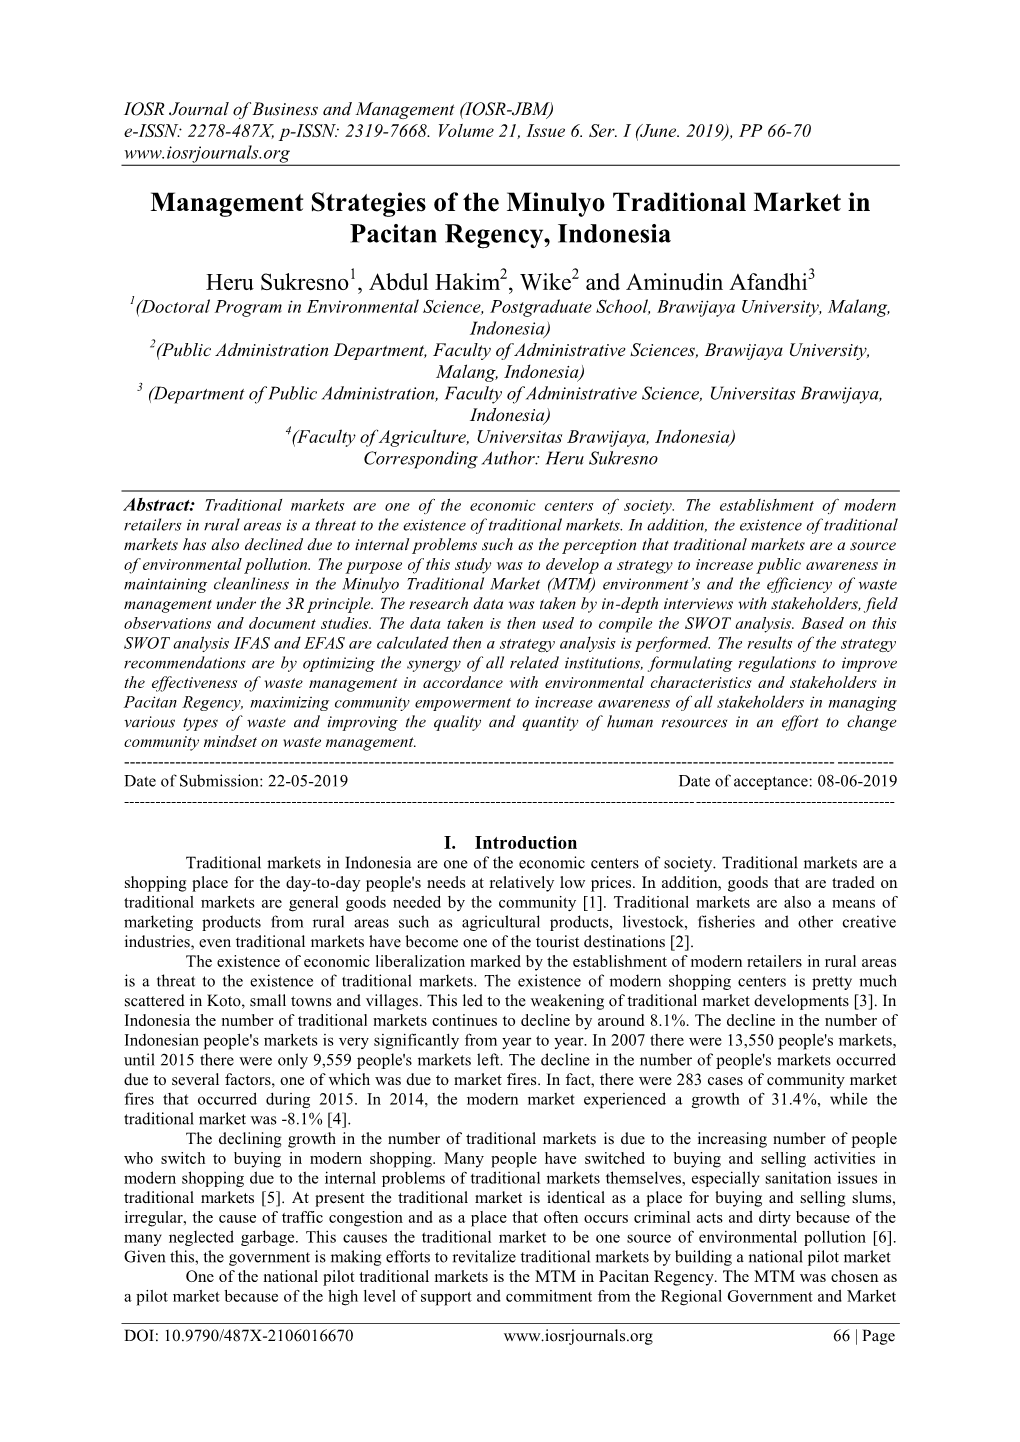 Management Strategies of the Minulyo Traditional Market in Pacitan Regency, Indonesia